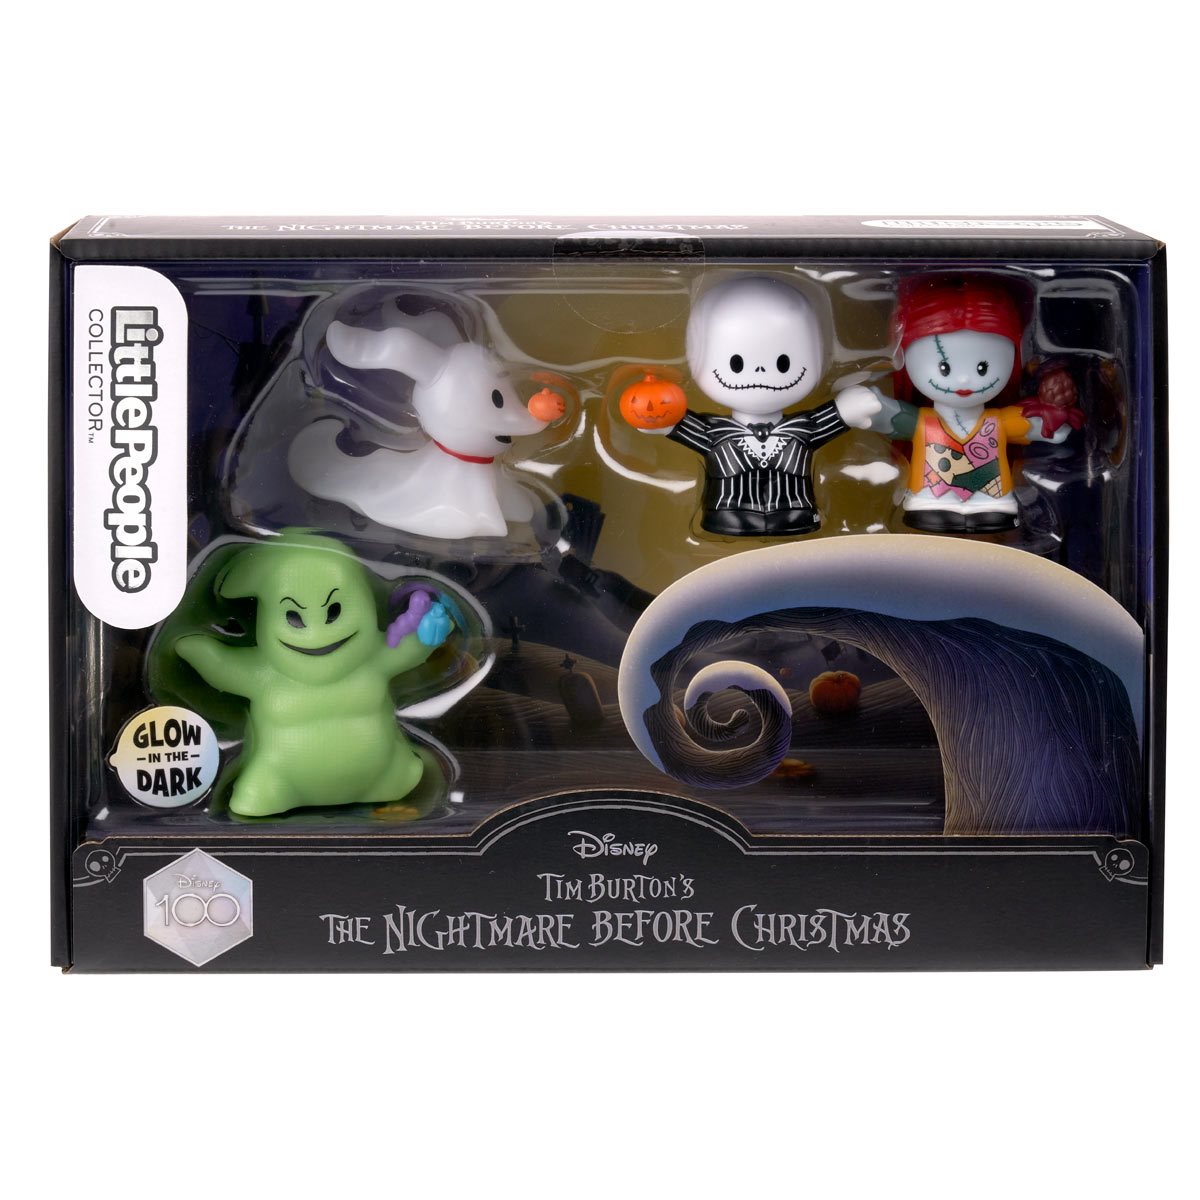 The cutest Nightmare Before Christmas little people play set from amaz